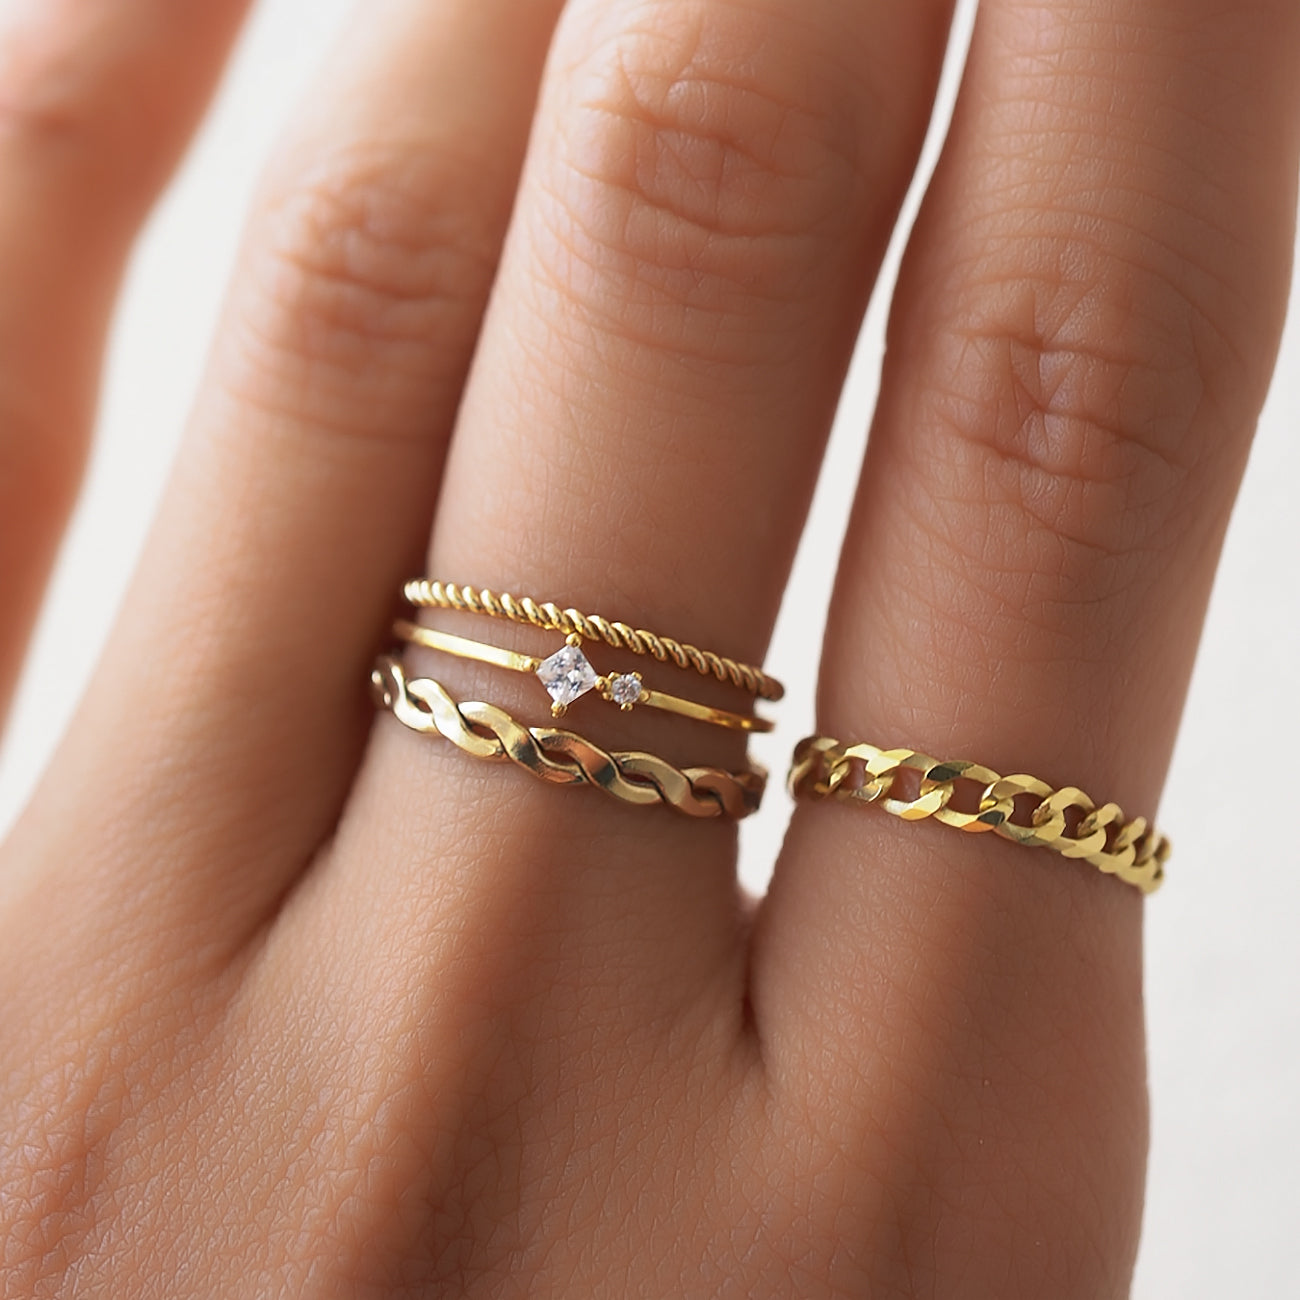 Gold Band Ring - Gold Chunky Crystal Band Ring 7 / Baguette